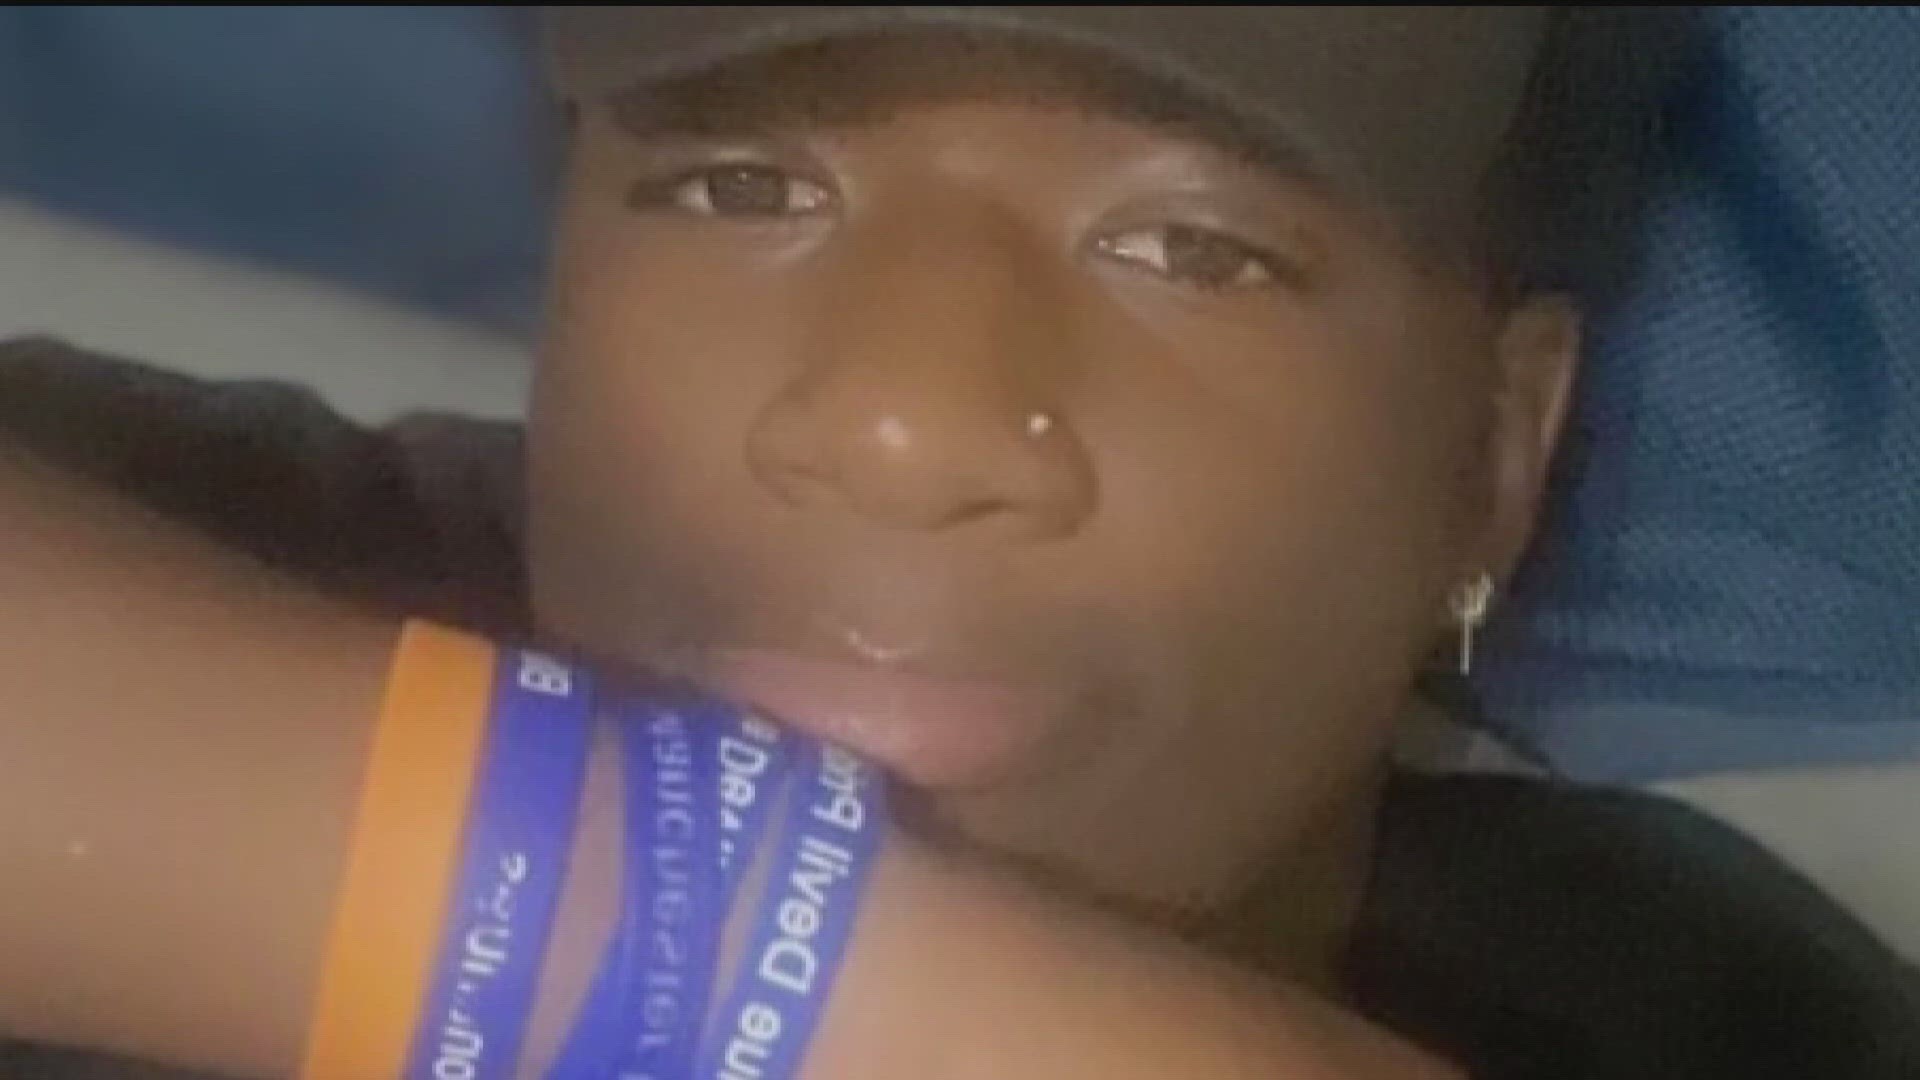 Brandon Smith was found shot and killed the night before the team's state championship game.